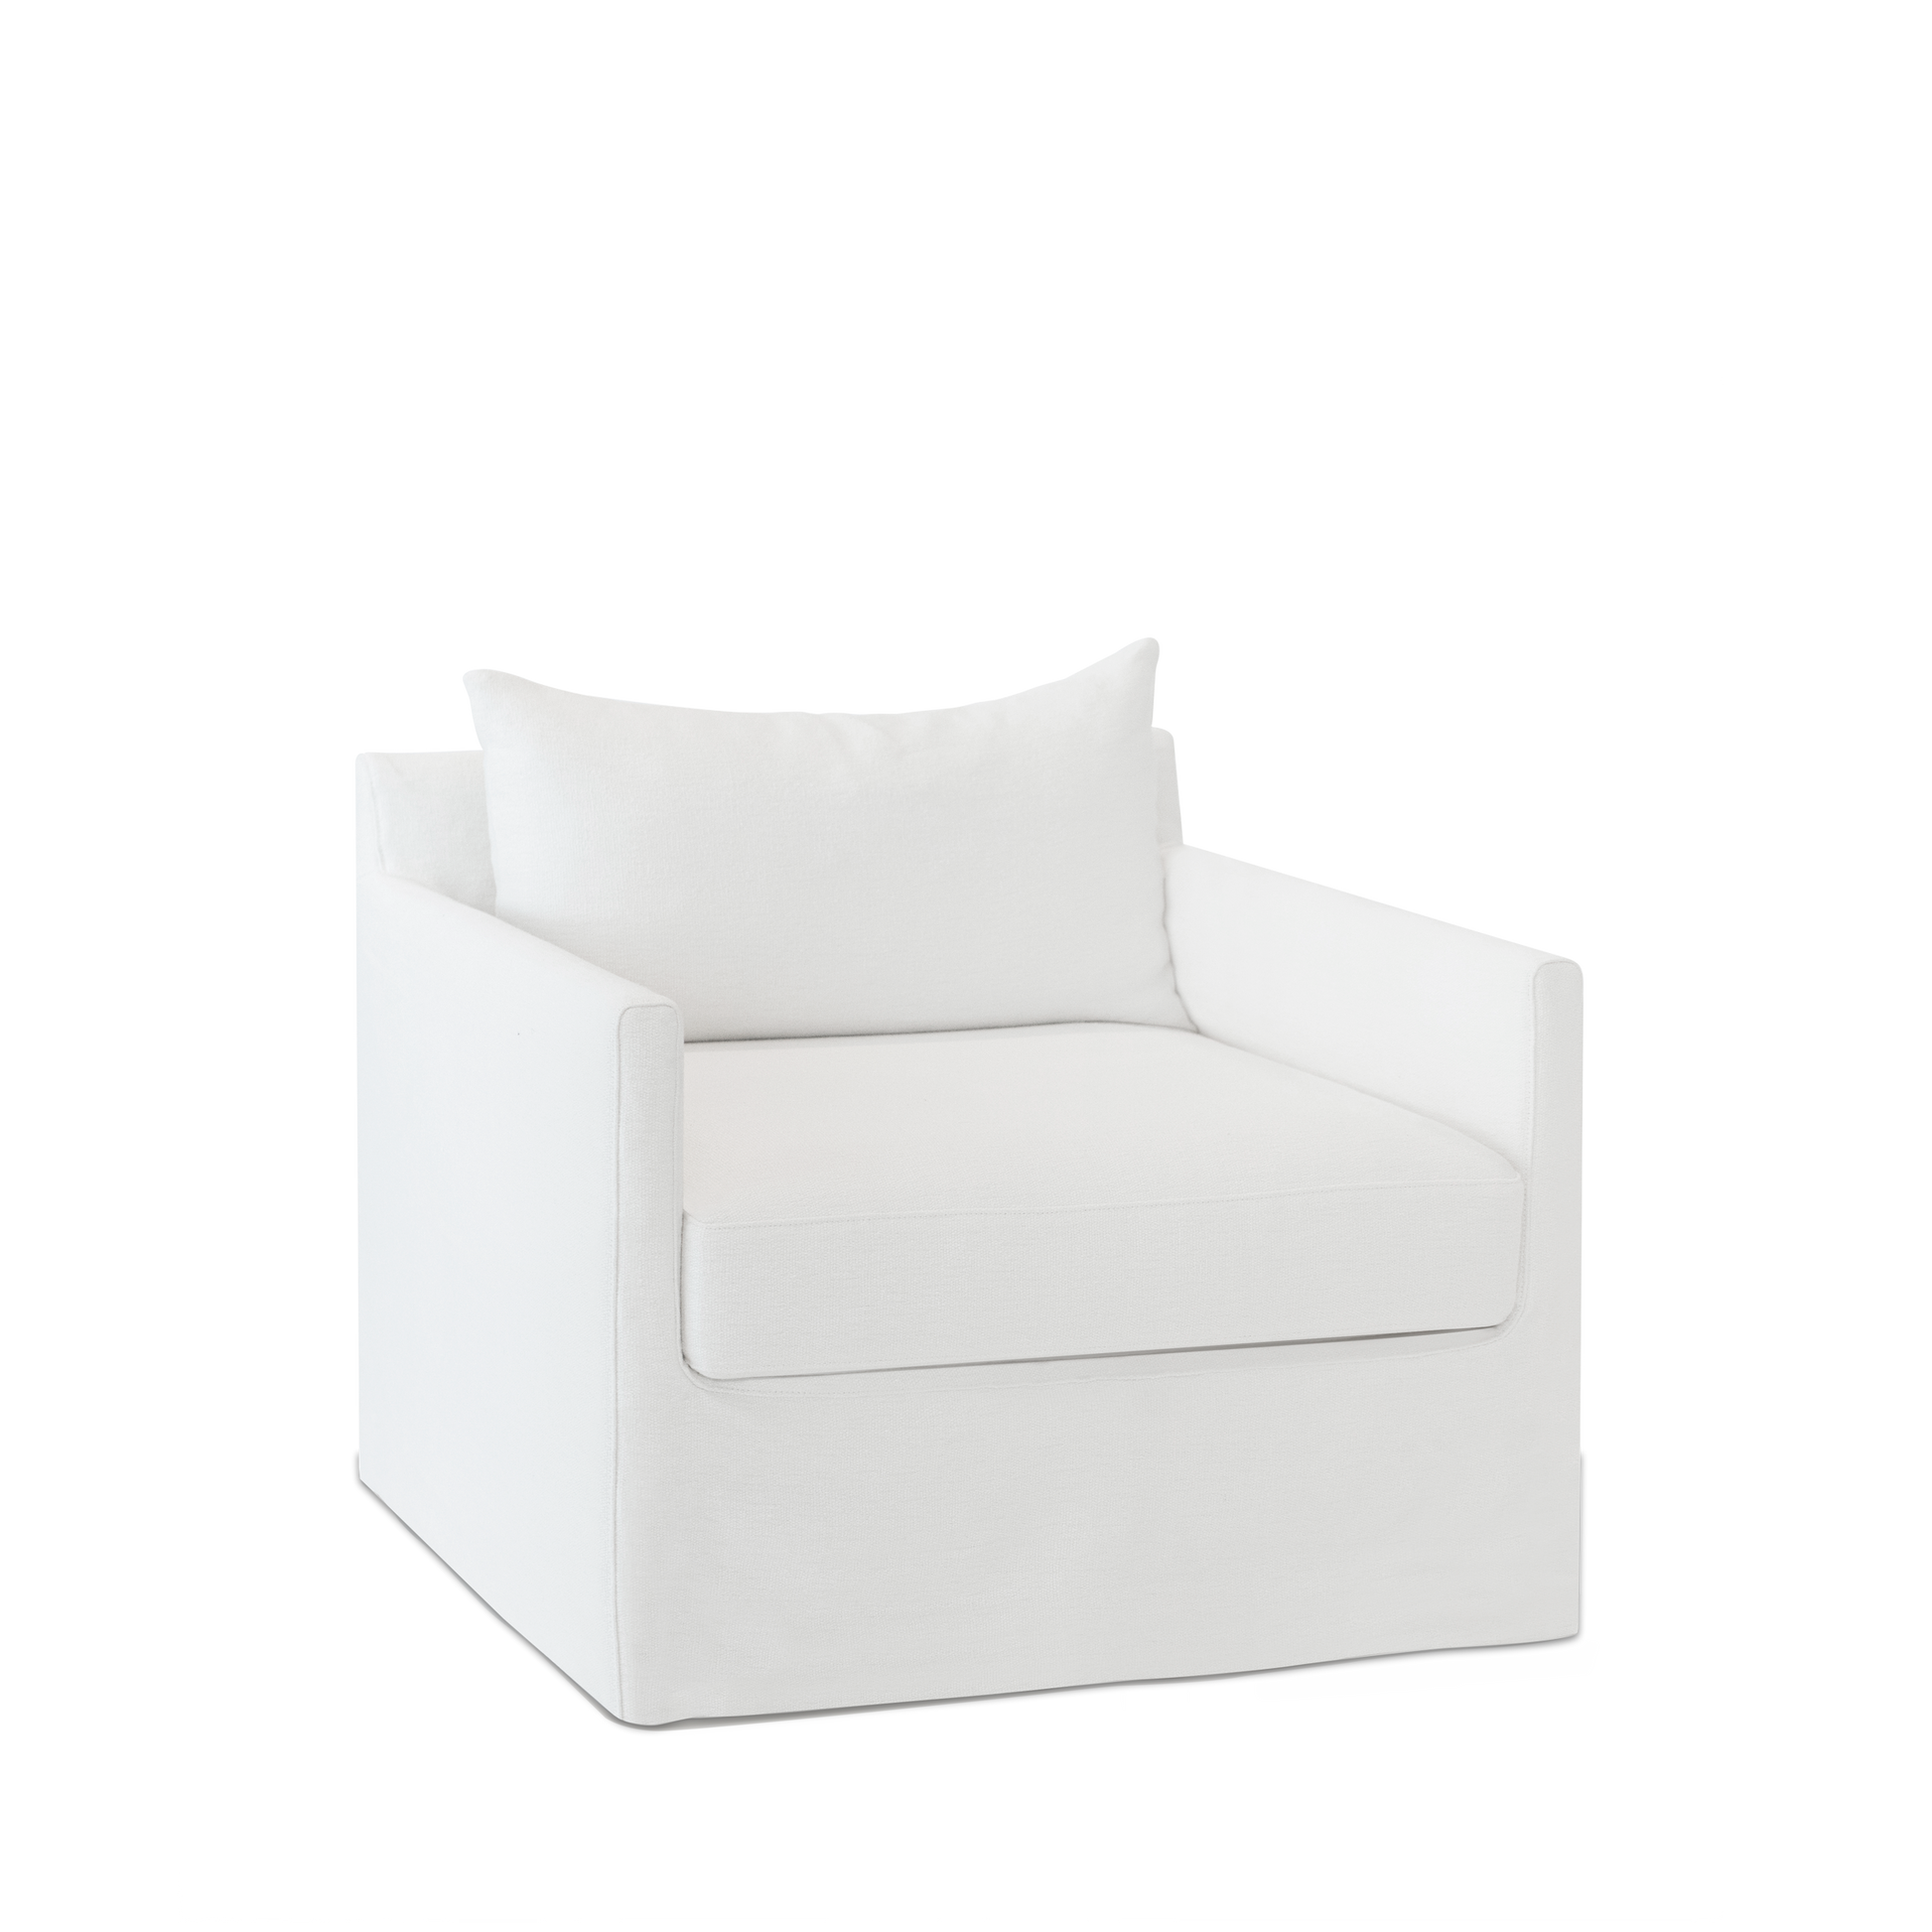 Extra wide and white Alba lounge chair from a side view